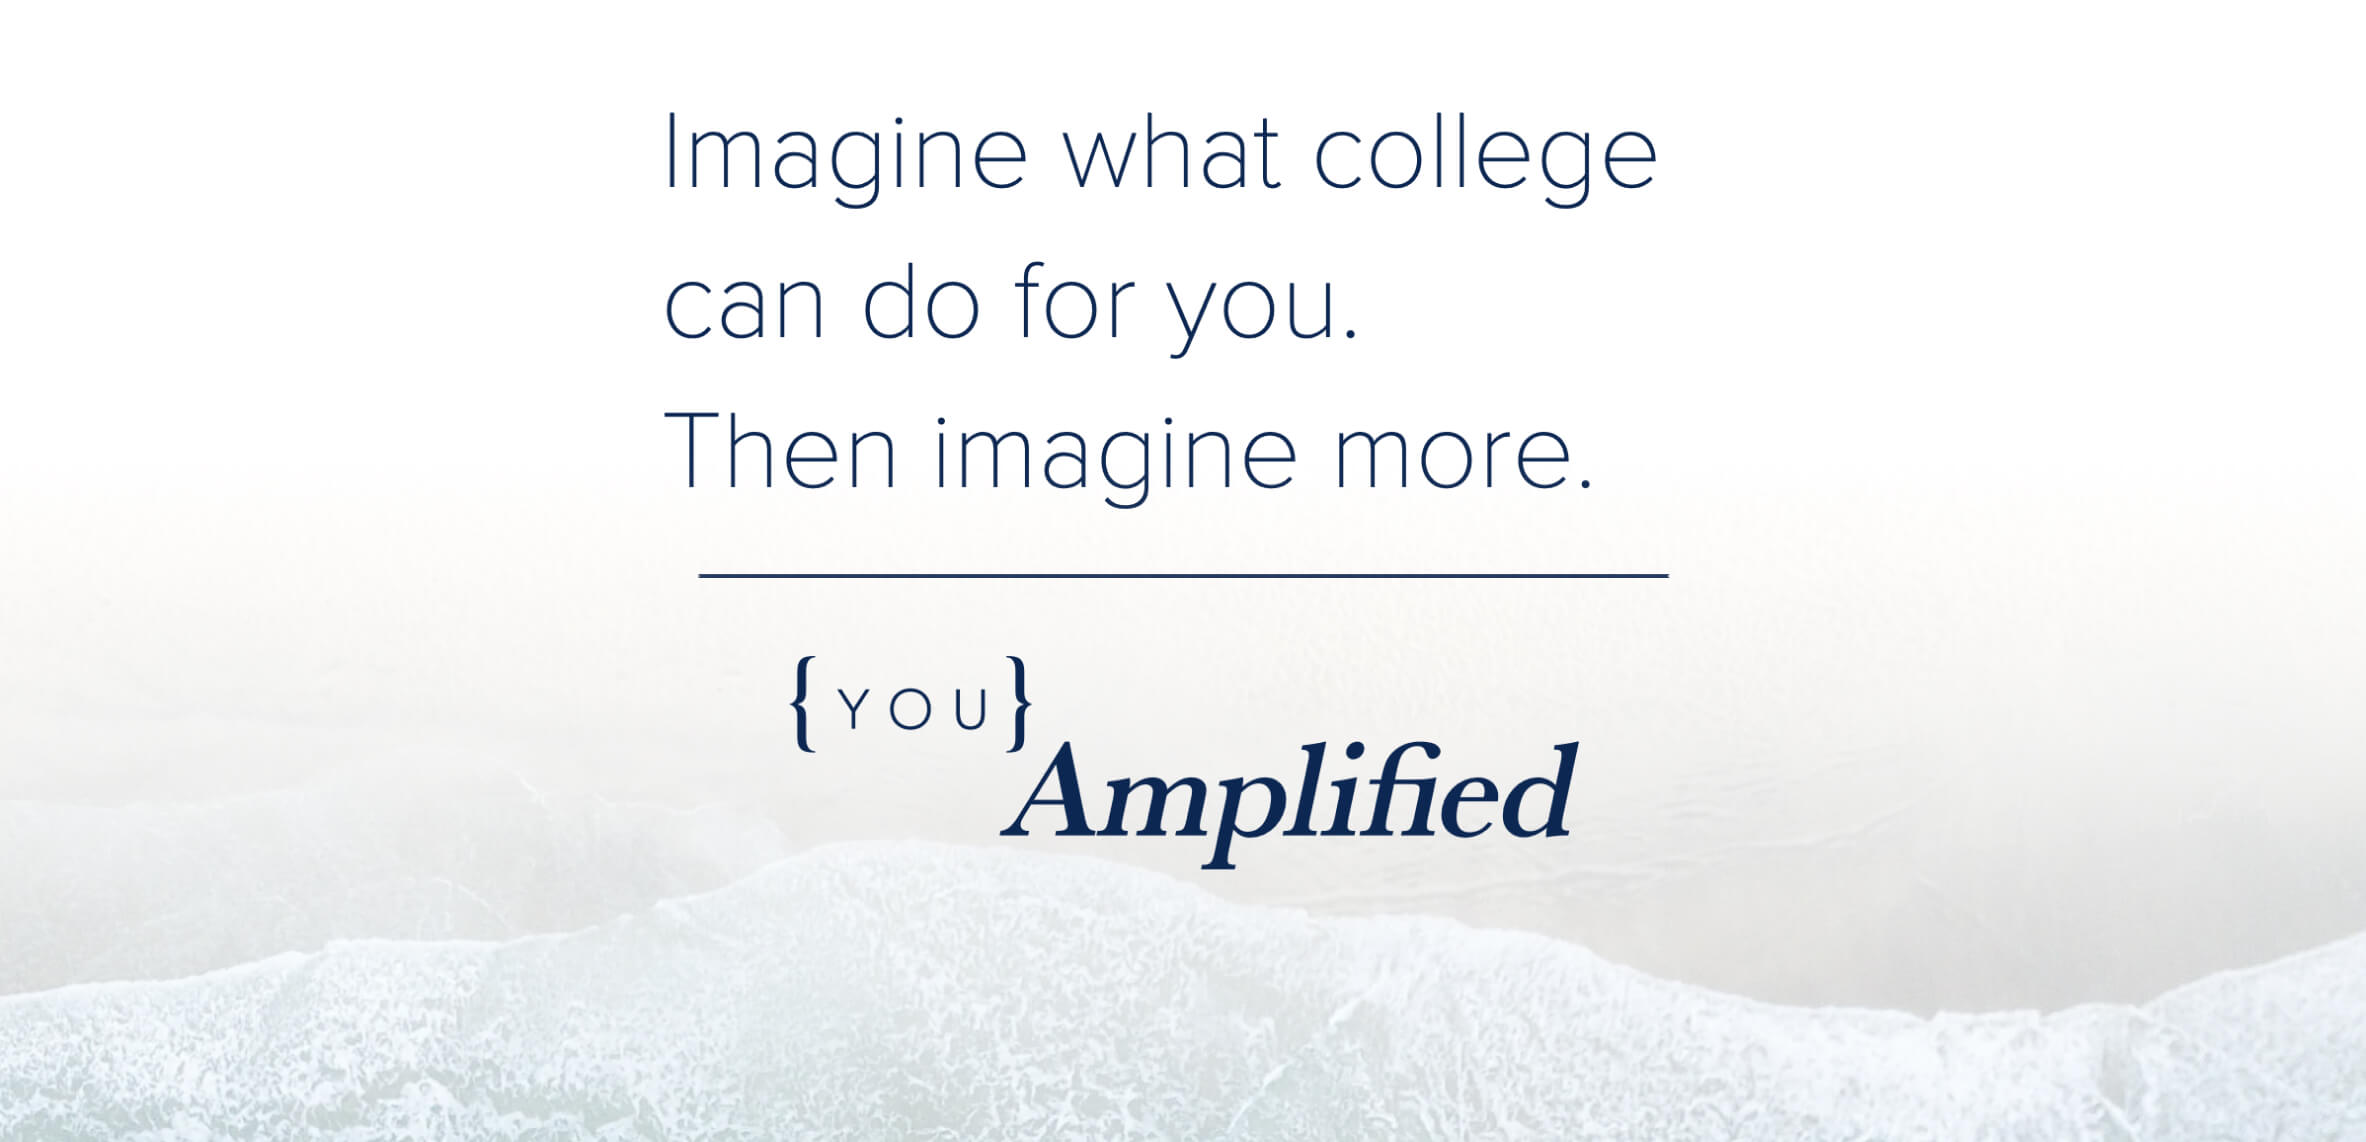 Imagine what college can do for you. Then imagine more. You Amplified. it written over an photo taken from the air of waves cascading on to a beach. 